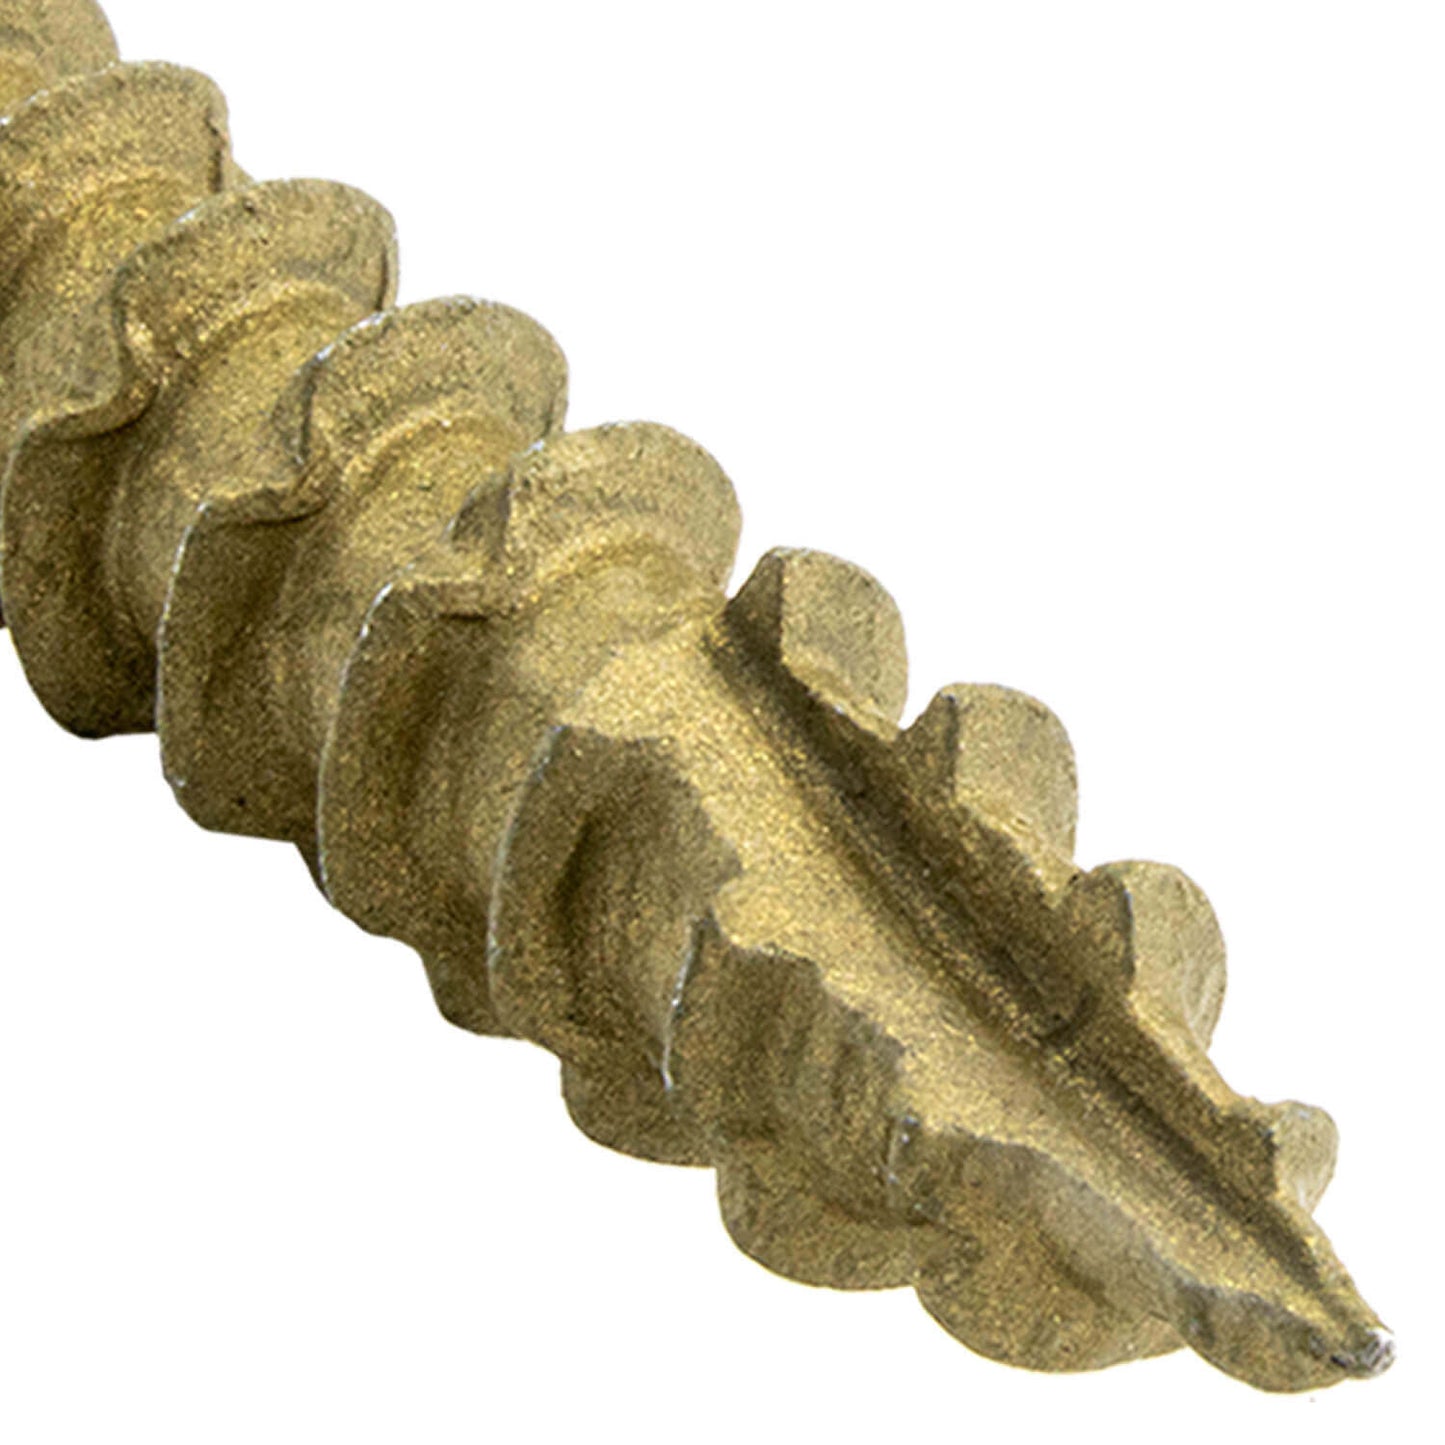 #14 Construction Lag Screws - Exterior Coated Torx/Star Drive Heavy Duty Structural Lag With Modified Truss Washer Head